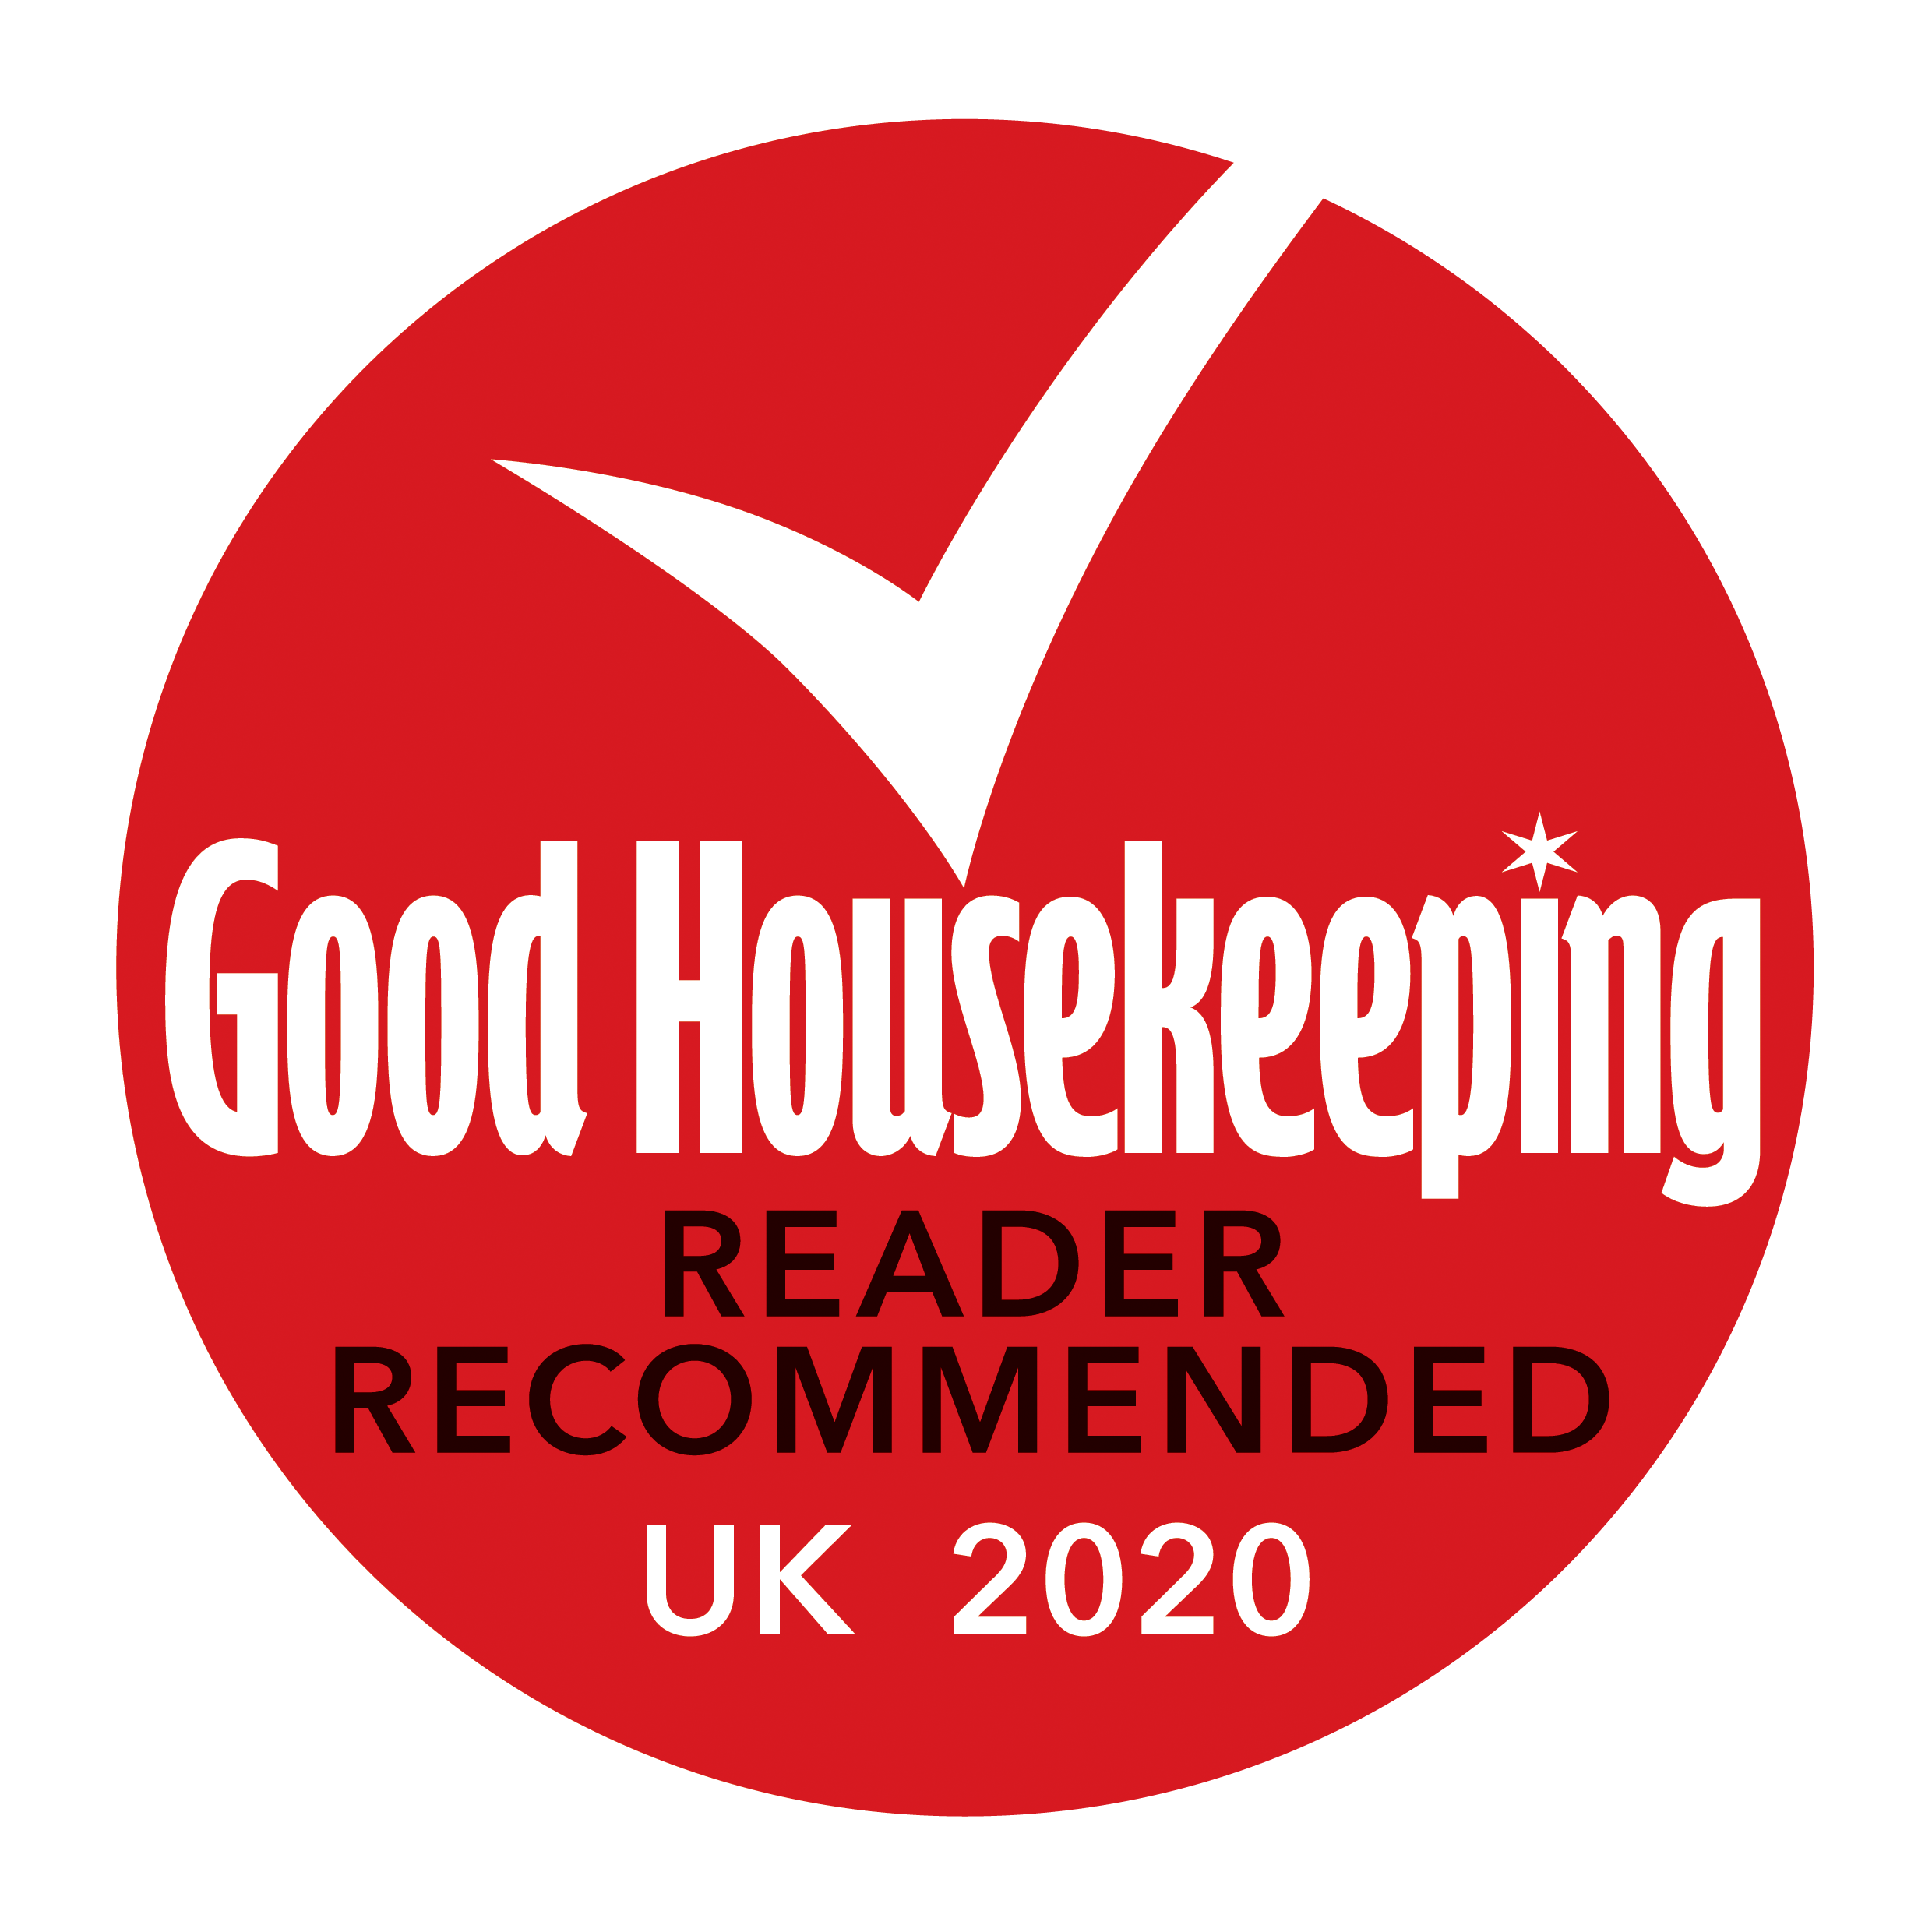 Good Housekeeping recommended 